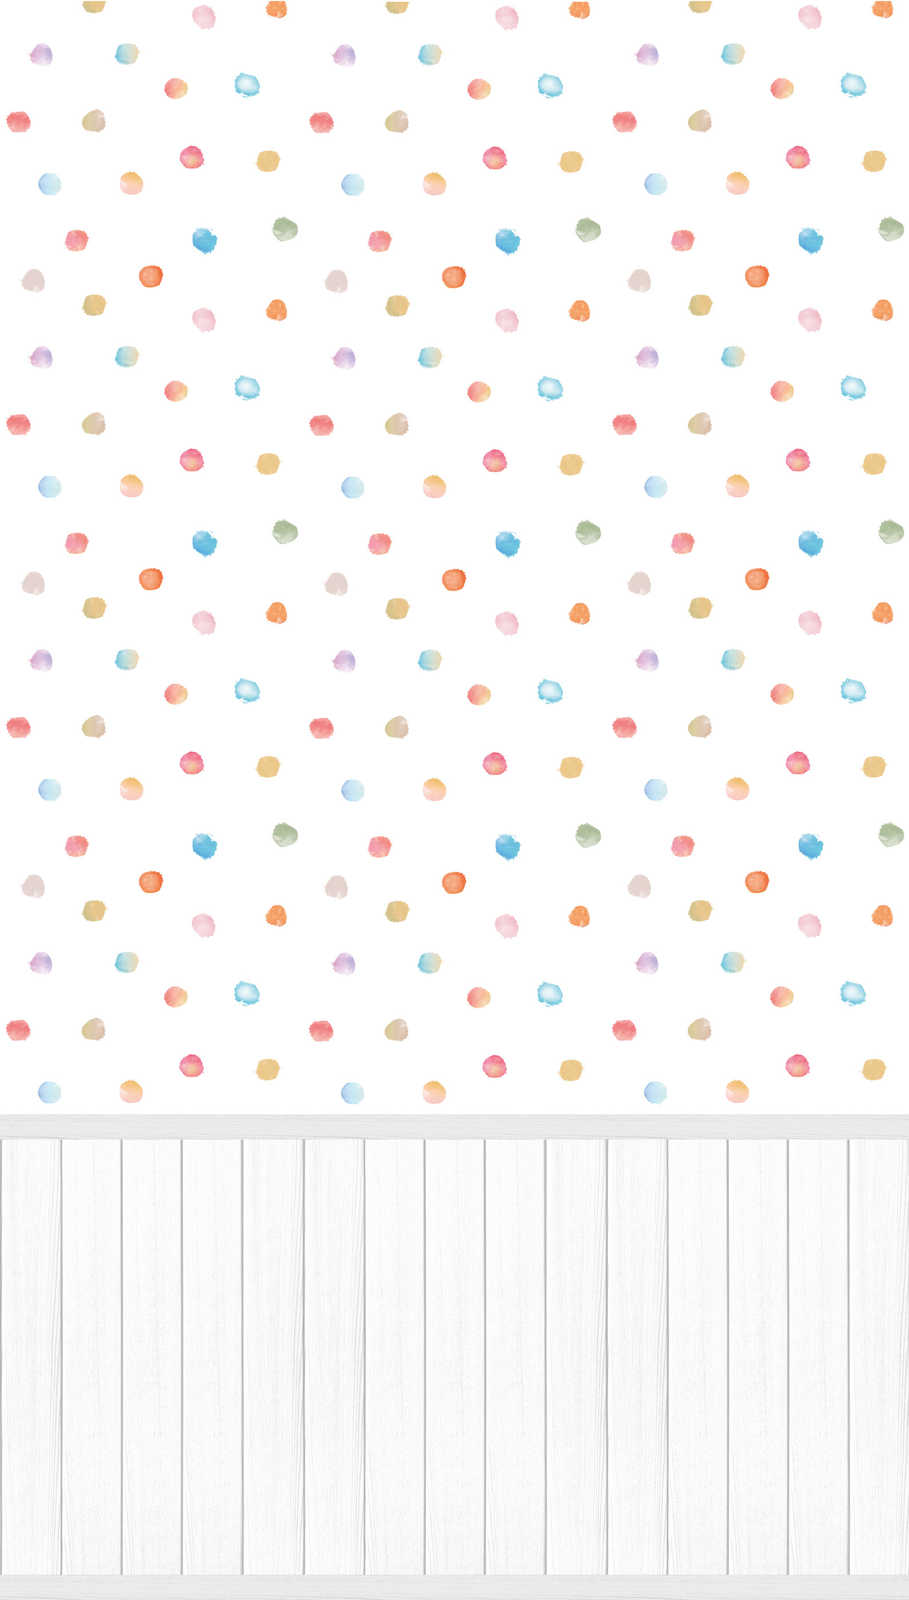             Non-woven motif wallpaper with wood-effect plinth border and dot pattern - white, grey, colourful
        